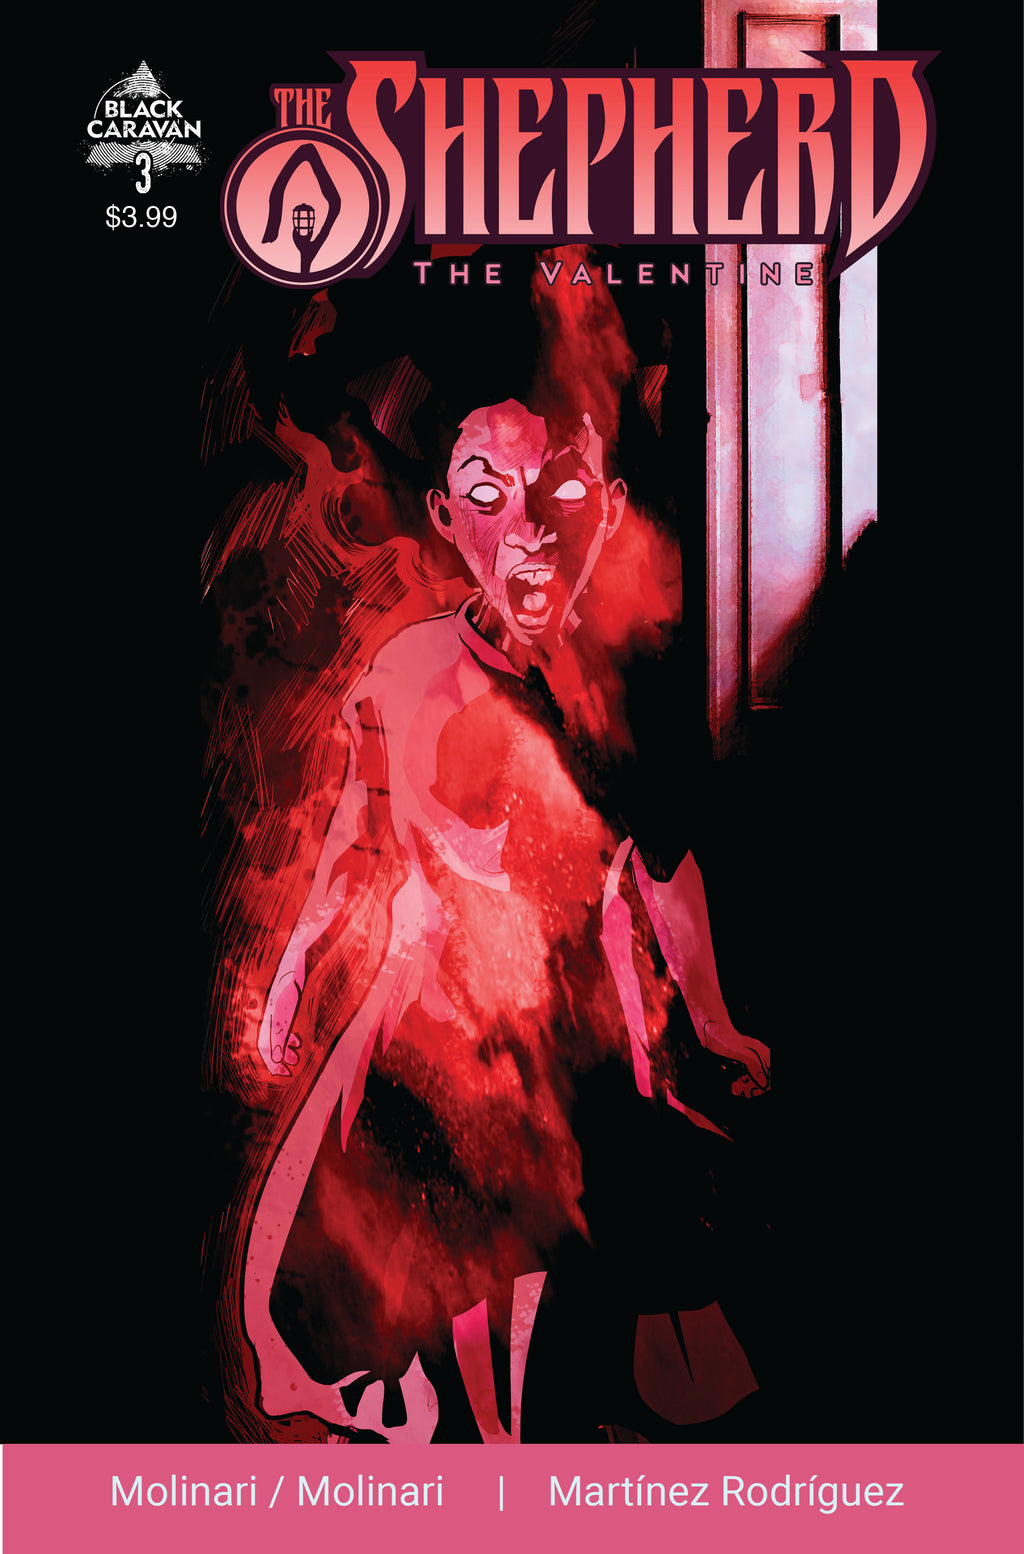 The Shepherd: The Valentine #3 - 1:10 Retailer Incentive Cover